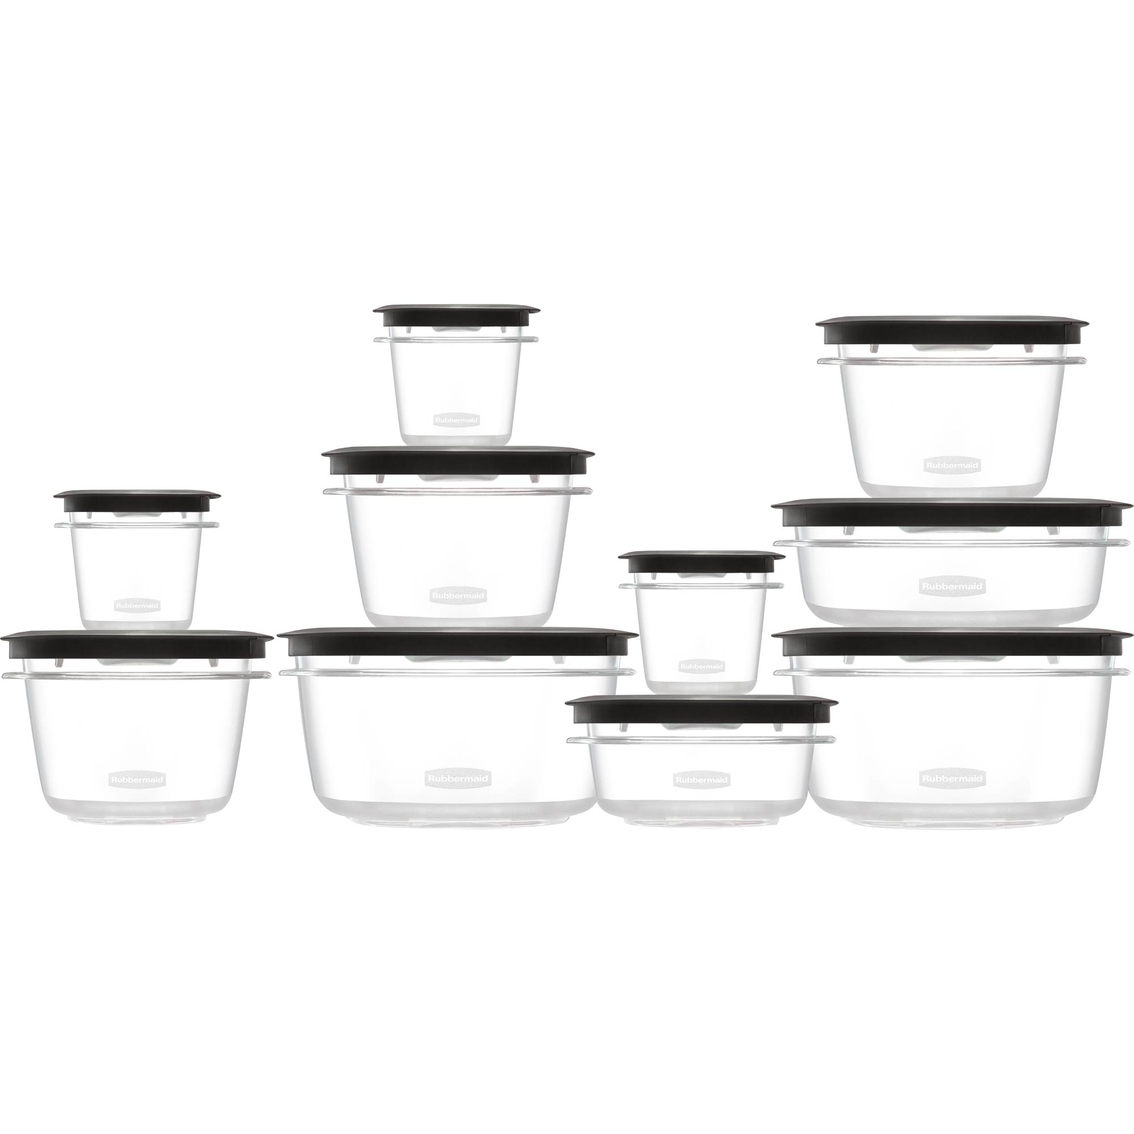 Rubbermaid premier food storage containers (20-piece set including